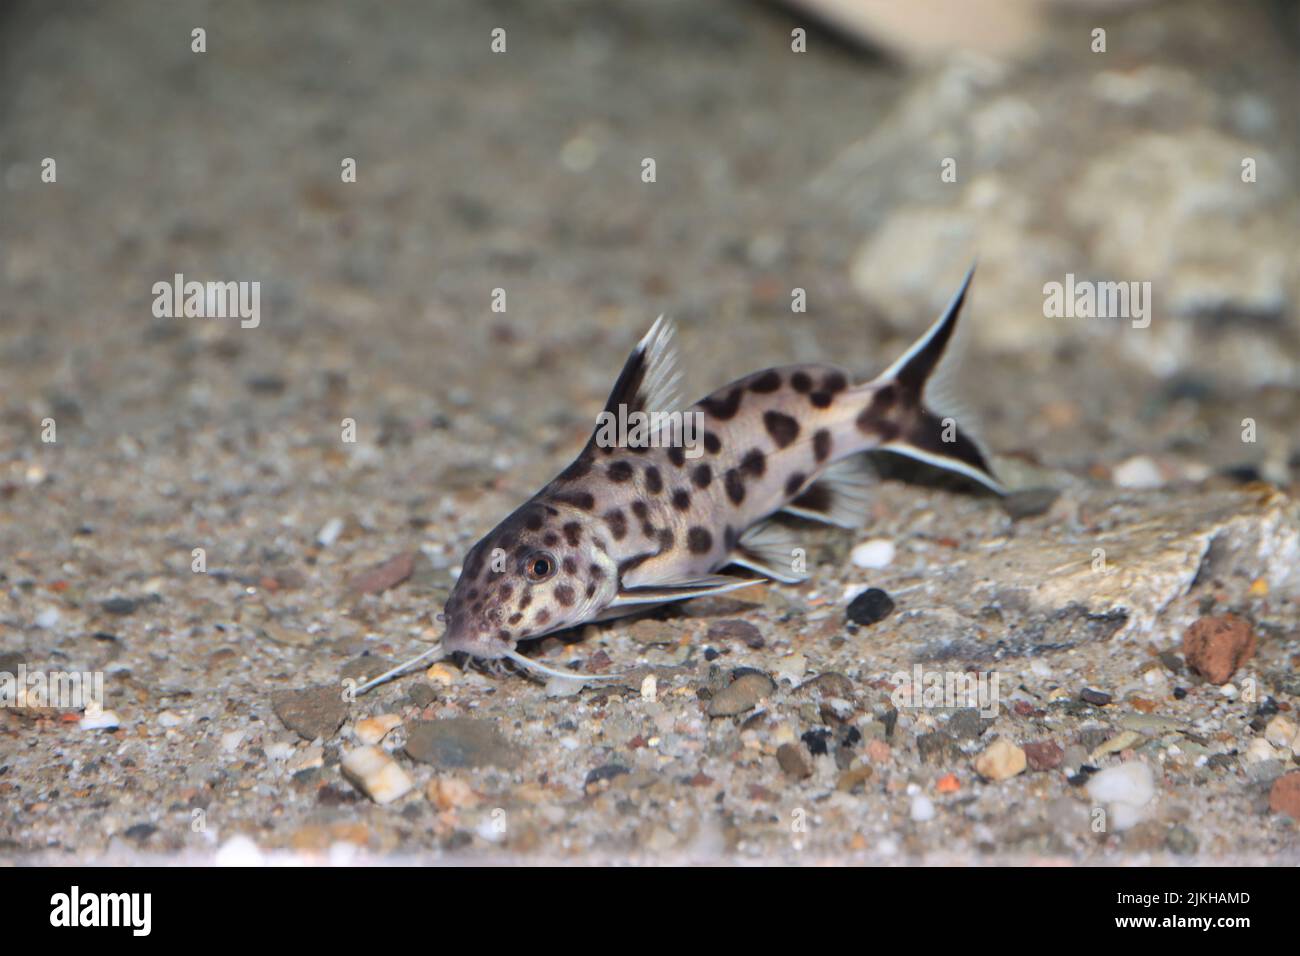 A Synodontis polli fish swimming underwater in a blurred background Stock Photo